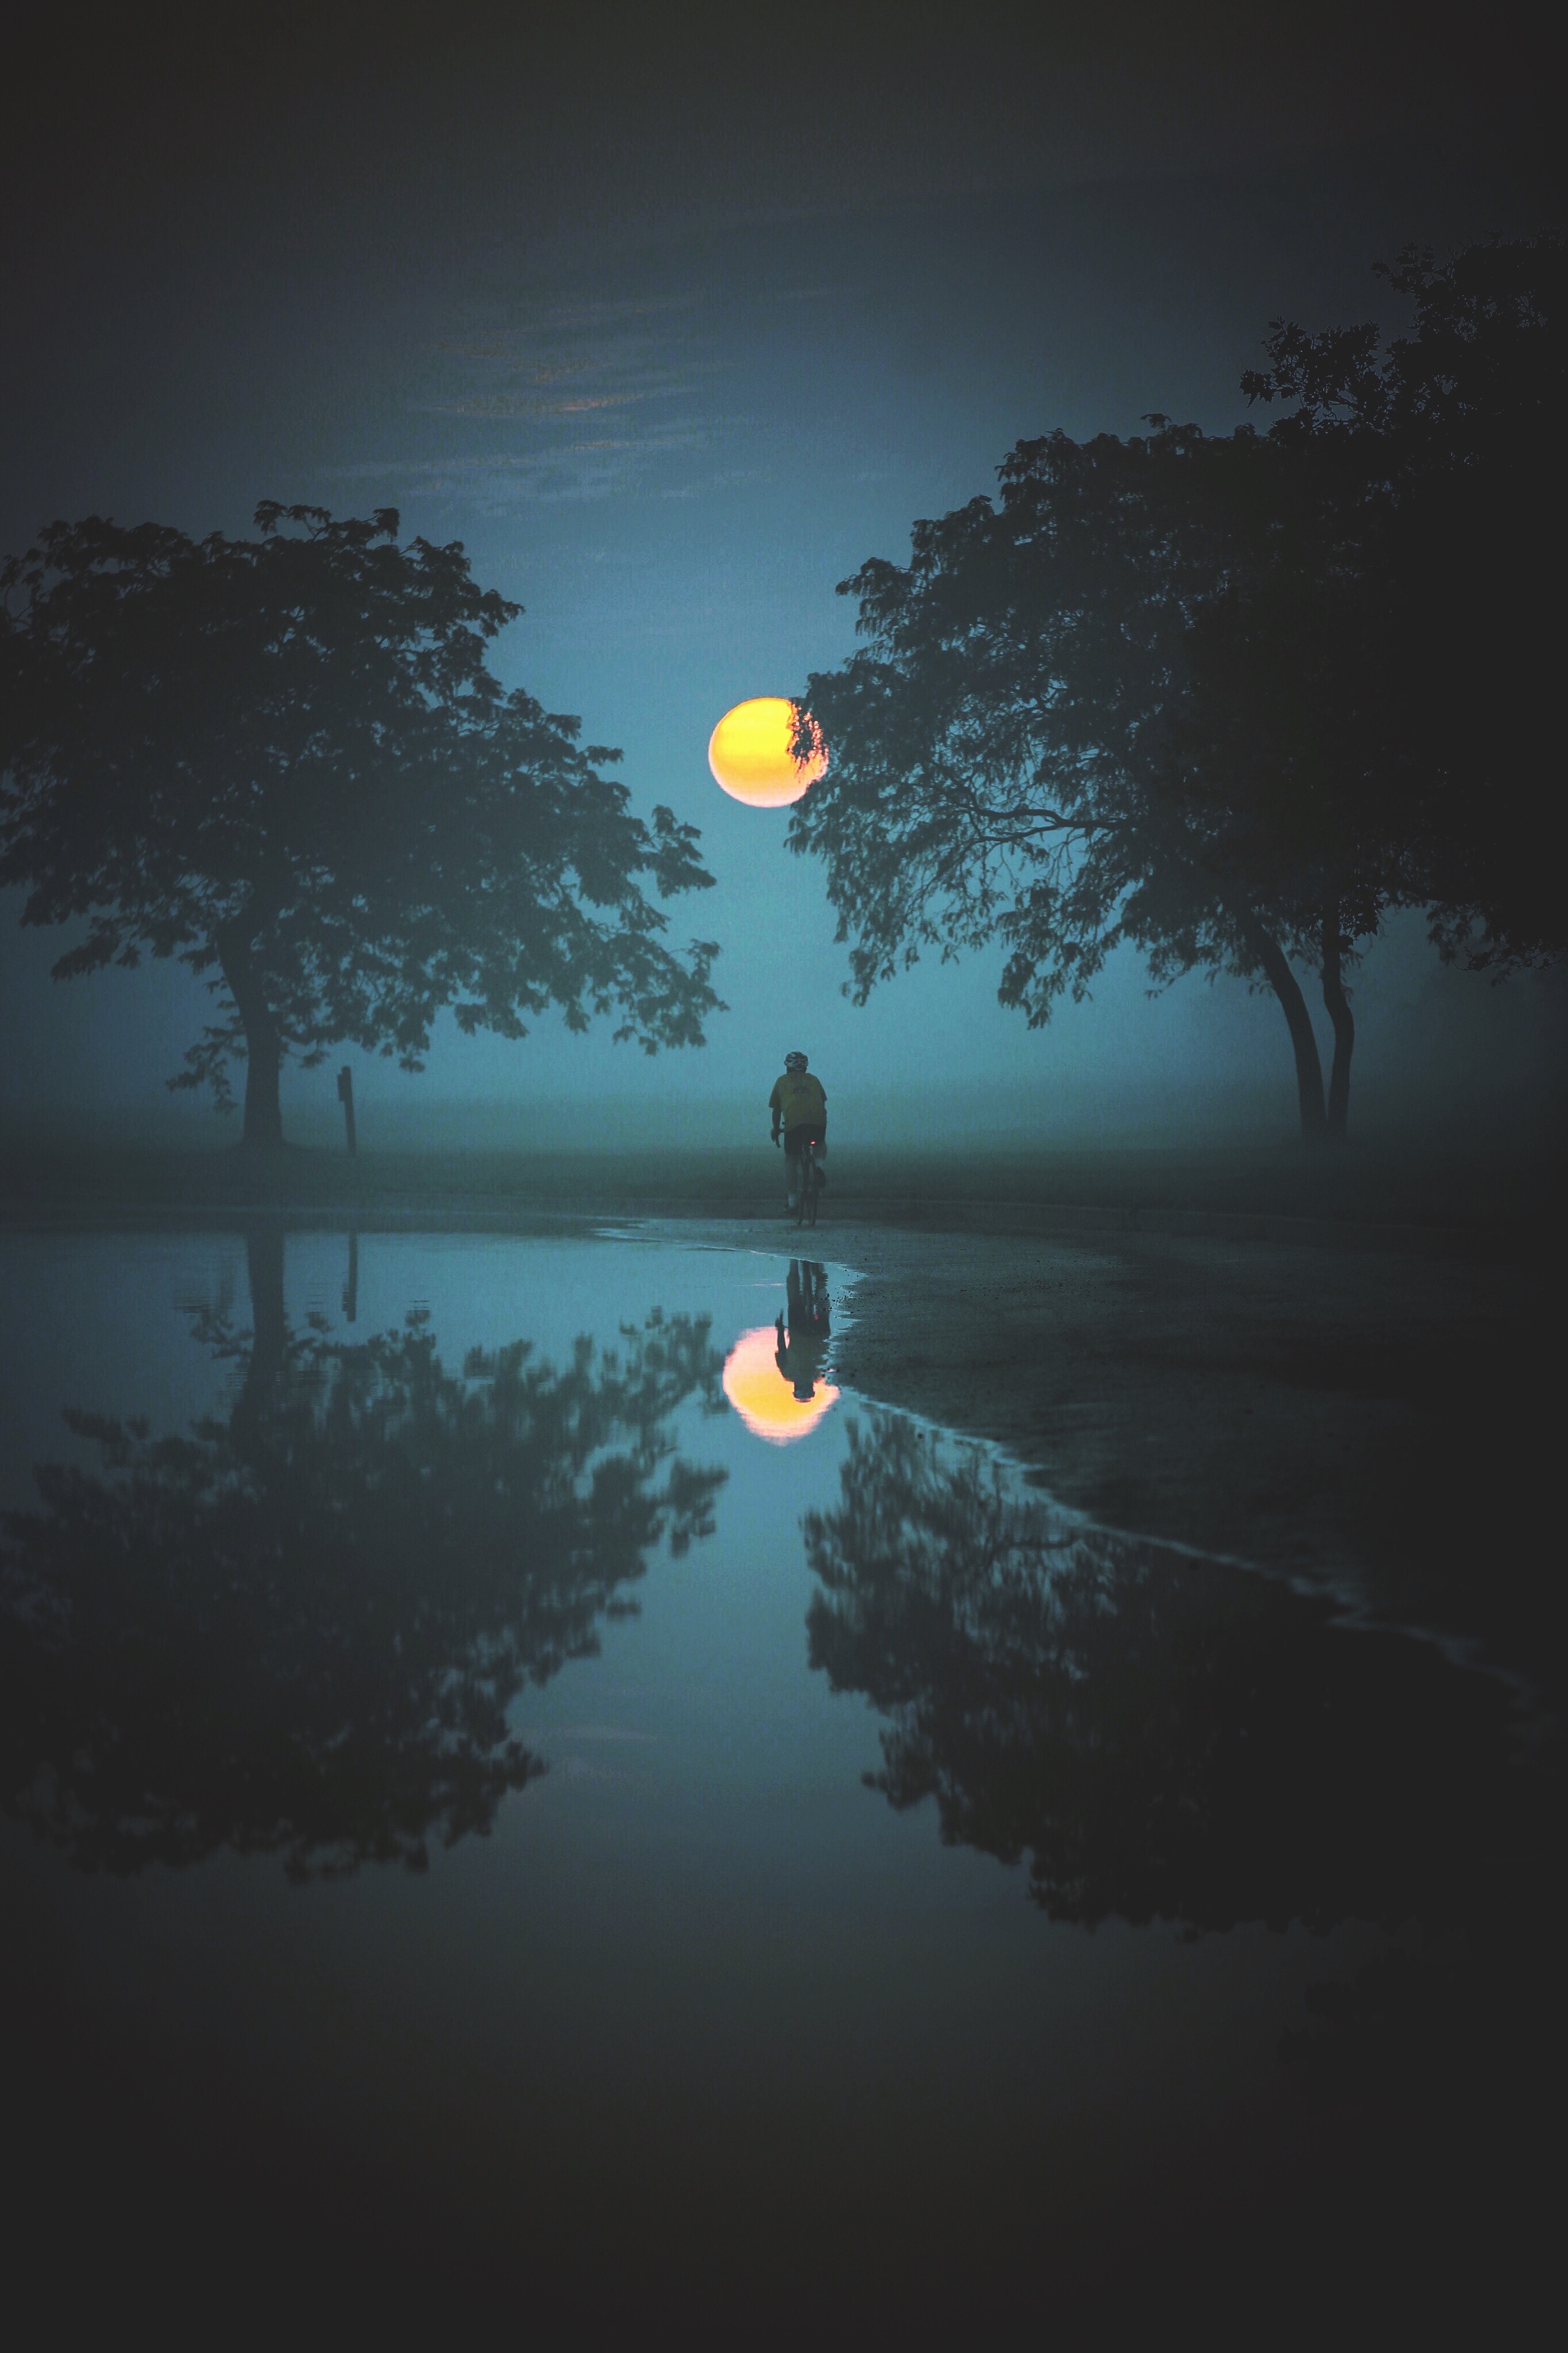 moon, reflection, nature, water, trees, fog, cyclist